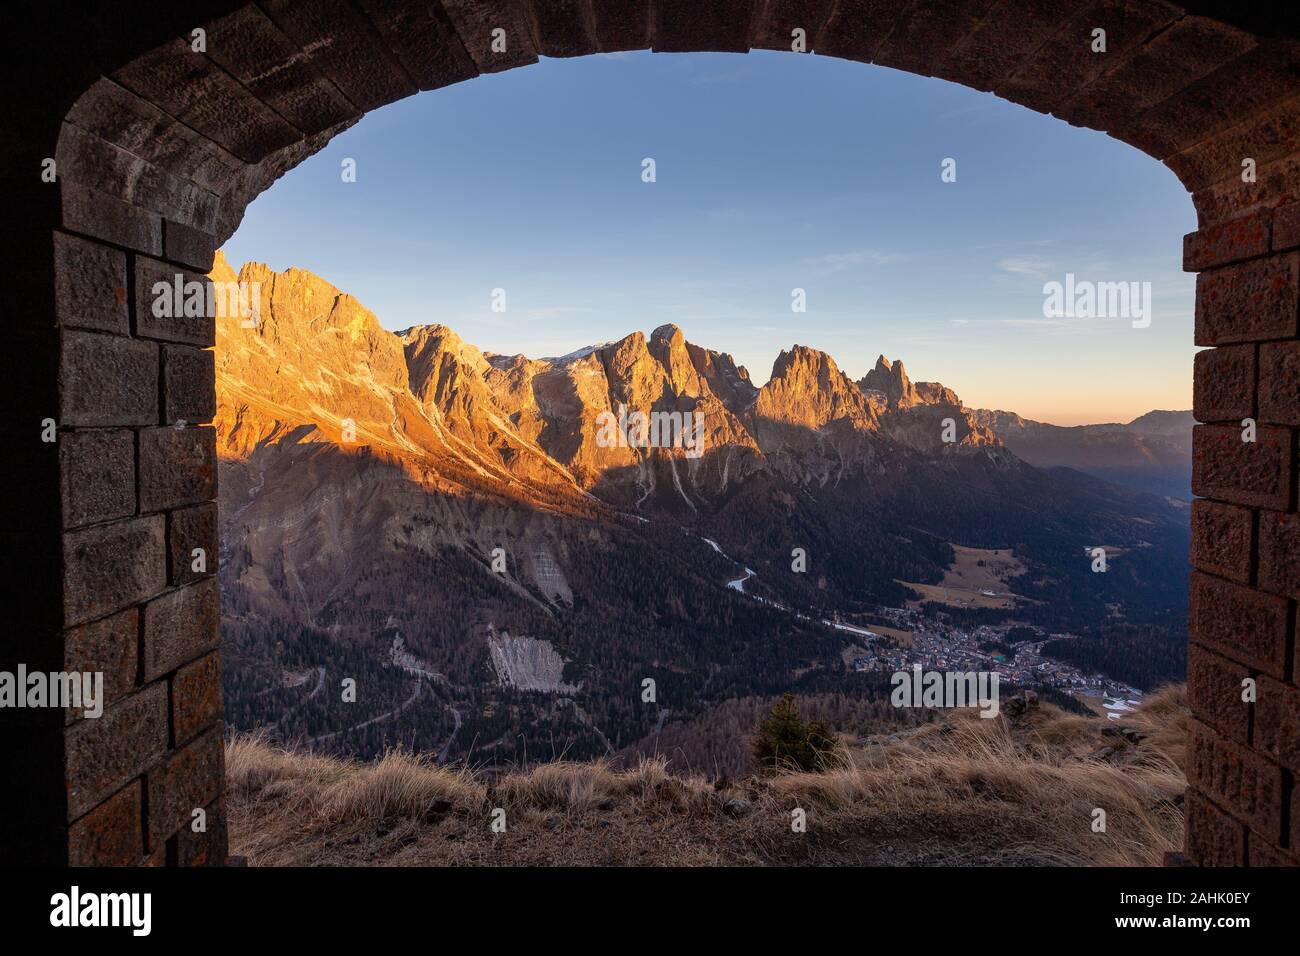 Alpenglow at sunset on the Pale di San Martino mountain group. View on San Martino di Castrozza town. The Dolomites of Trentino. Italian Alps, Europe. Stock Photo